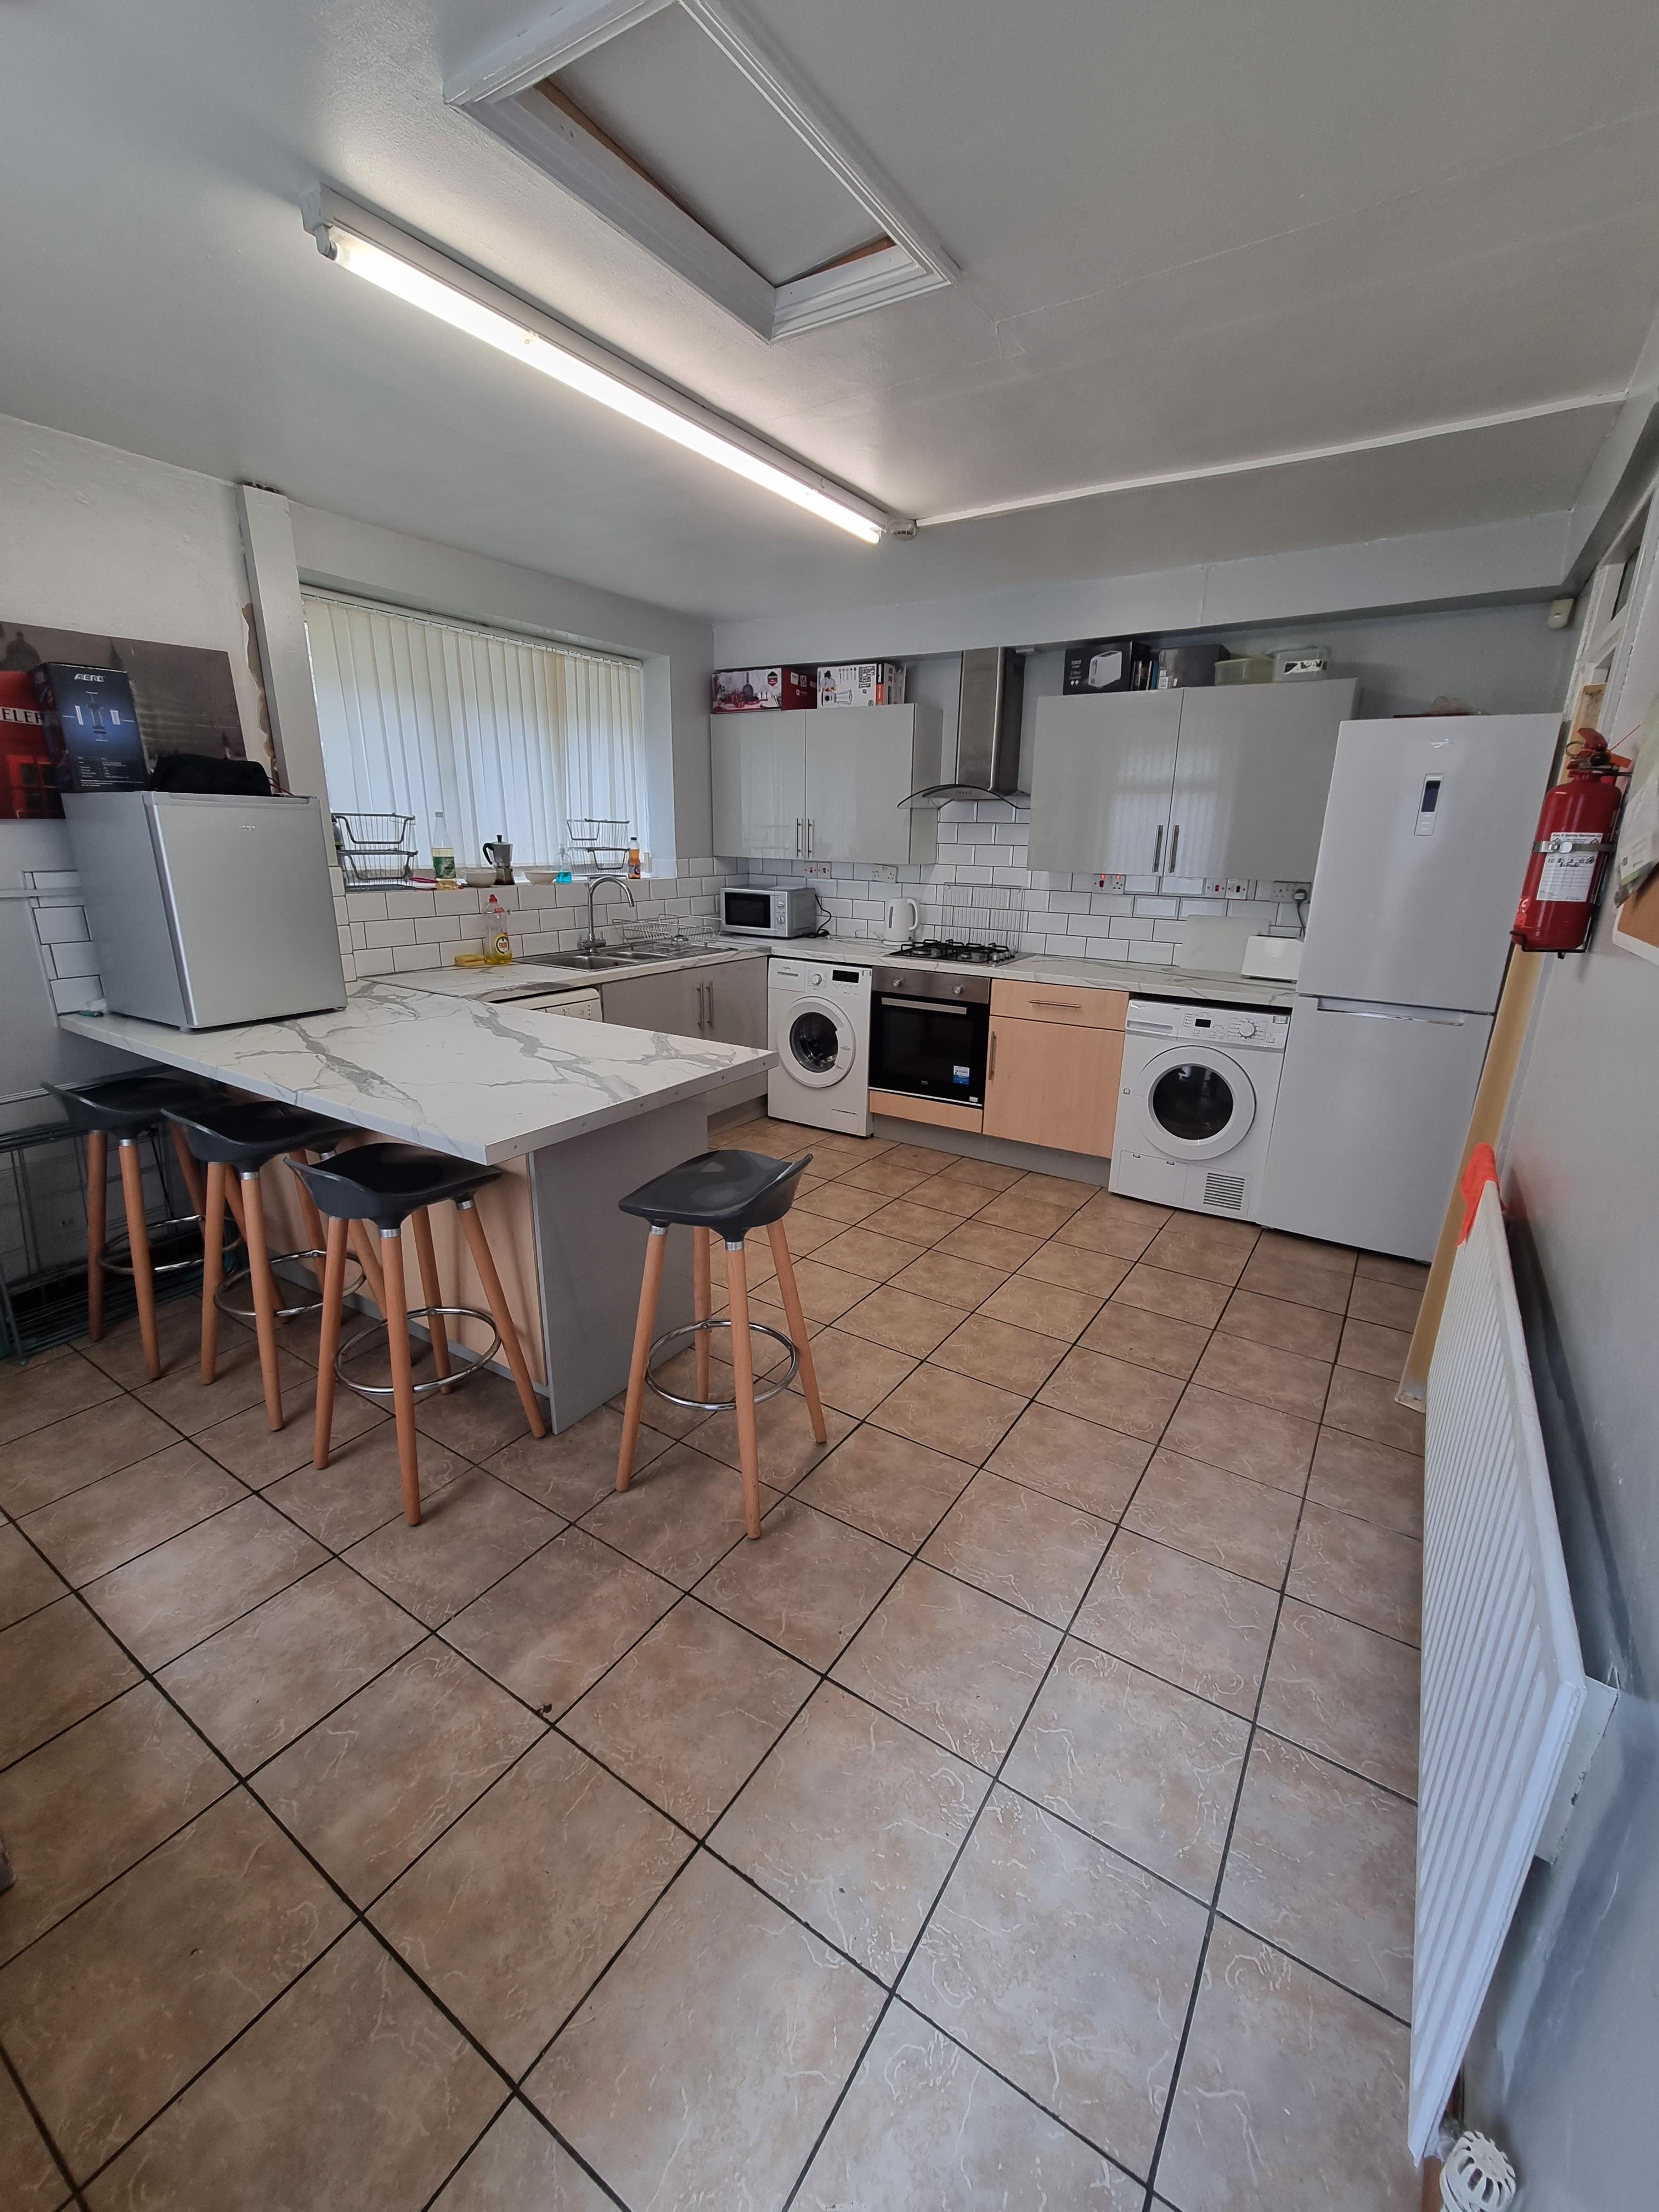 1 bed house / flat share to rent in Wood Road , Treforest   - Property Image 1